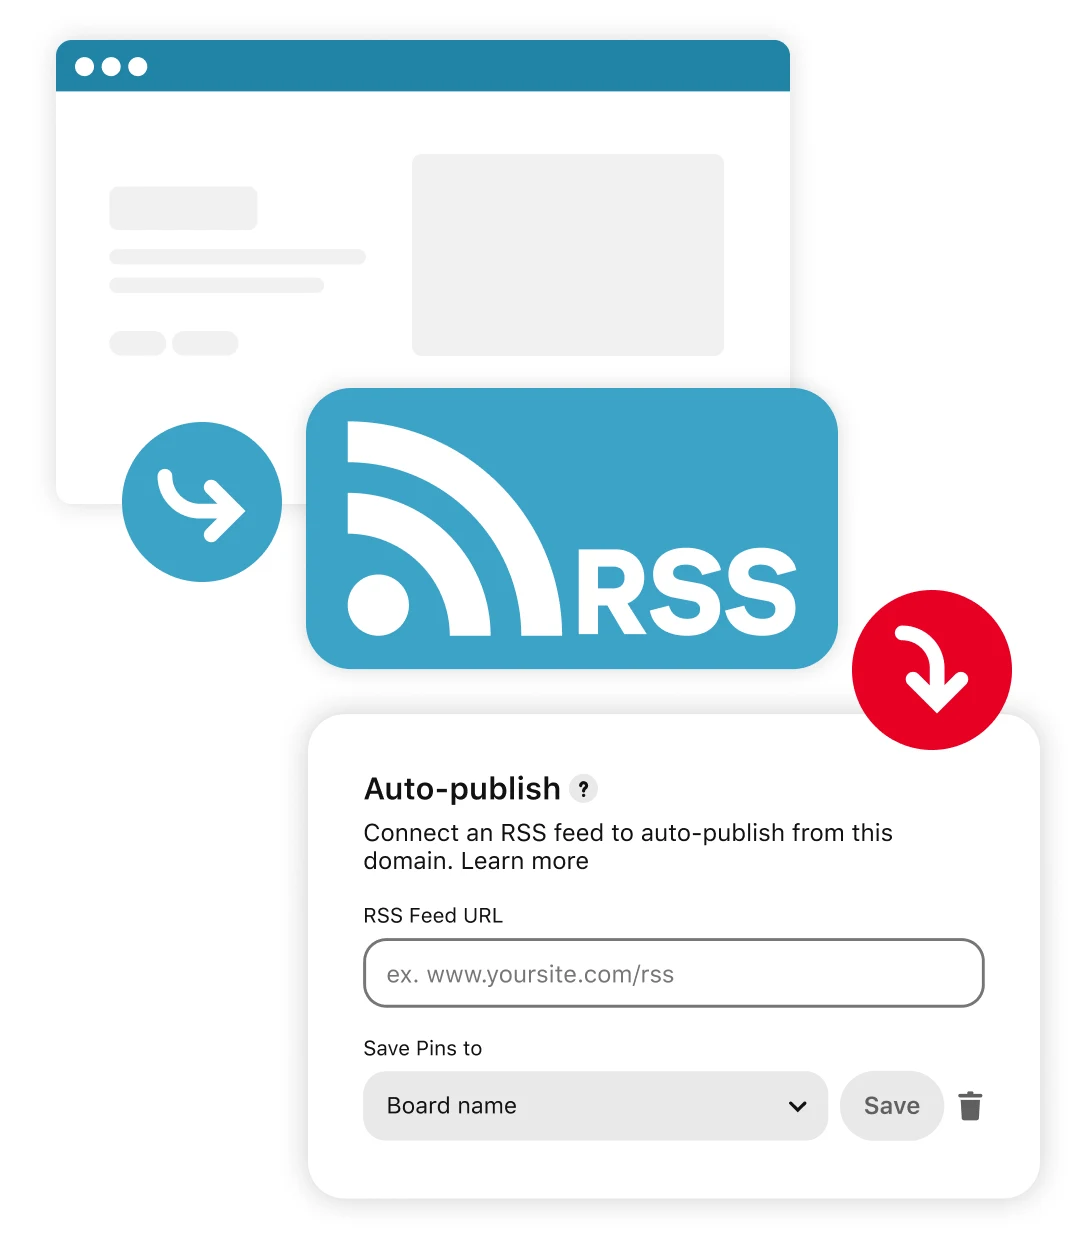 Rendering of flow from RSS feed to Pinterest auto-publishing